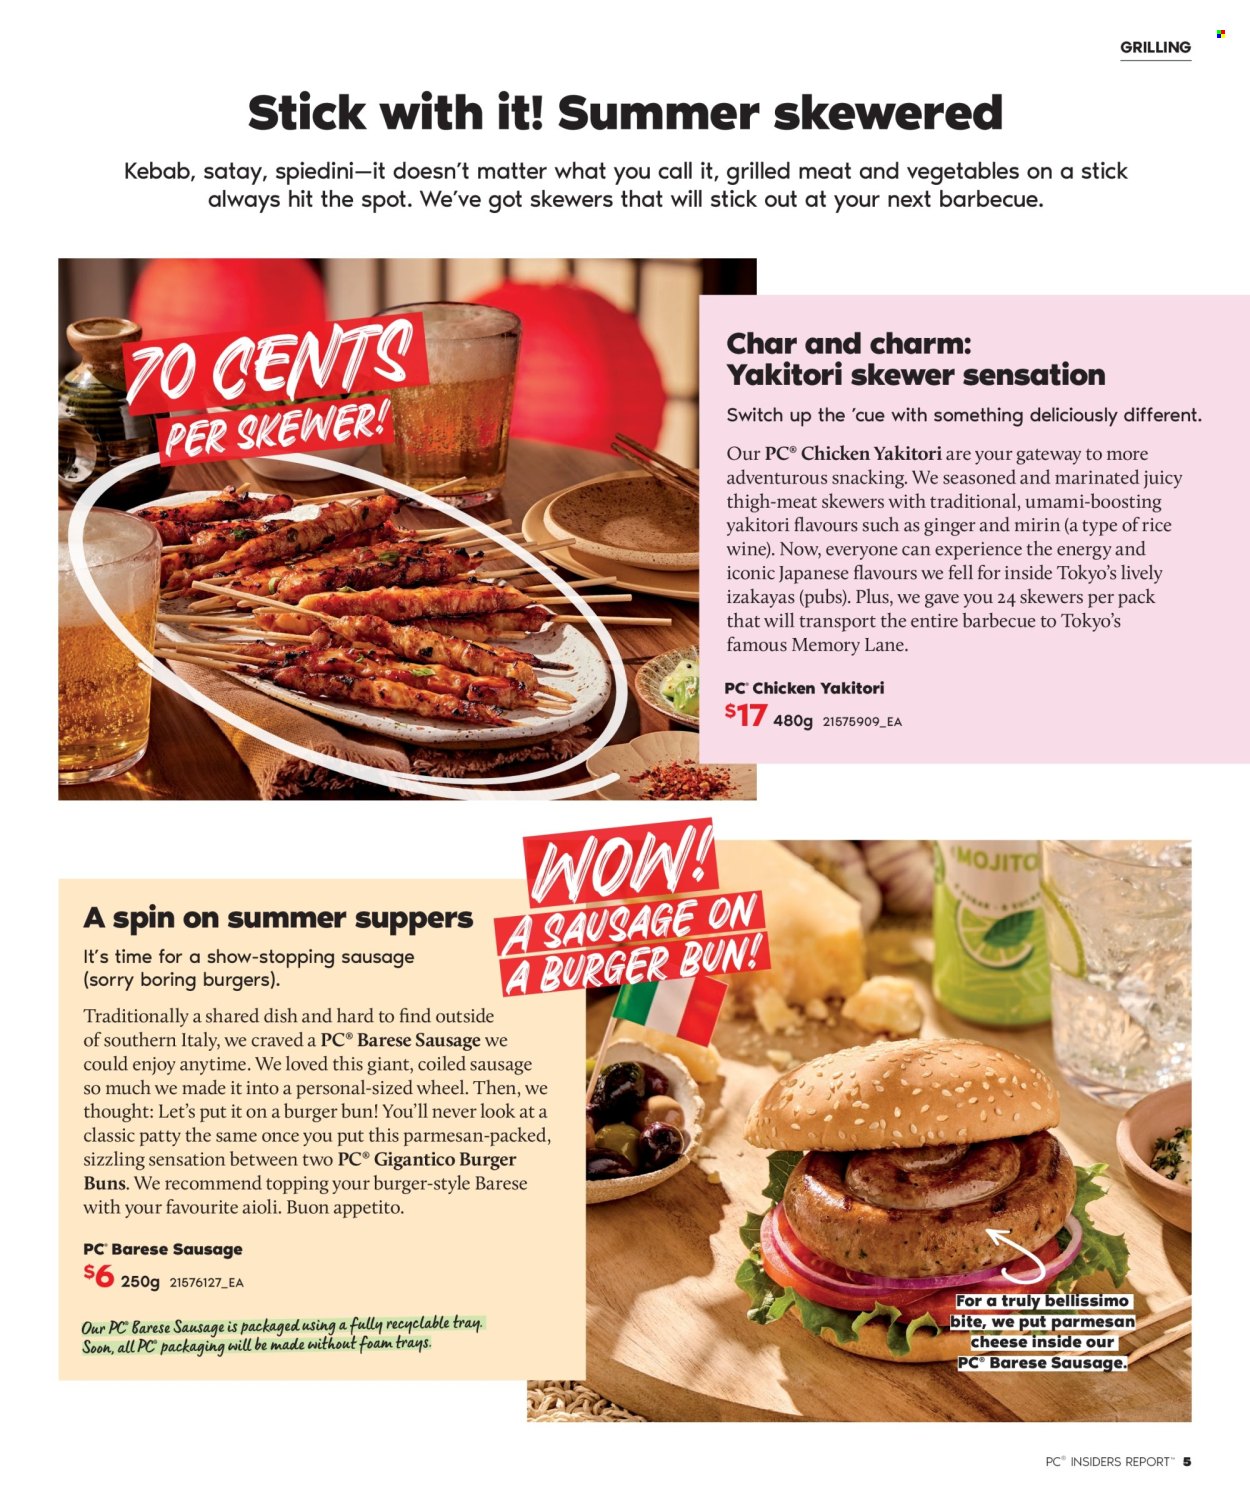 thumbnail - Shoppers Drug Mart Flyer - Sales products - buns, burger buns, kabobs, sausage, parmesan, cheese, salty snack, topping, ginger, mirin, switch, tray, gateway, alcohol. Page 5.